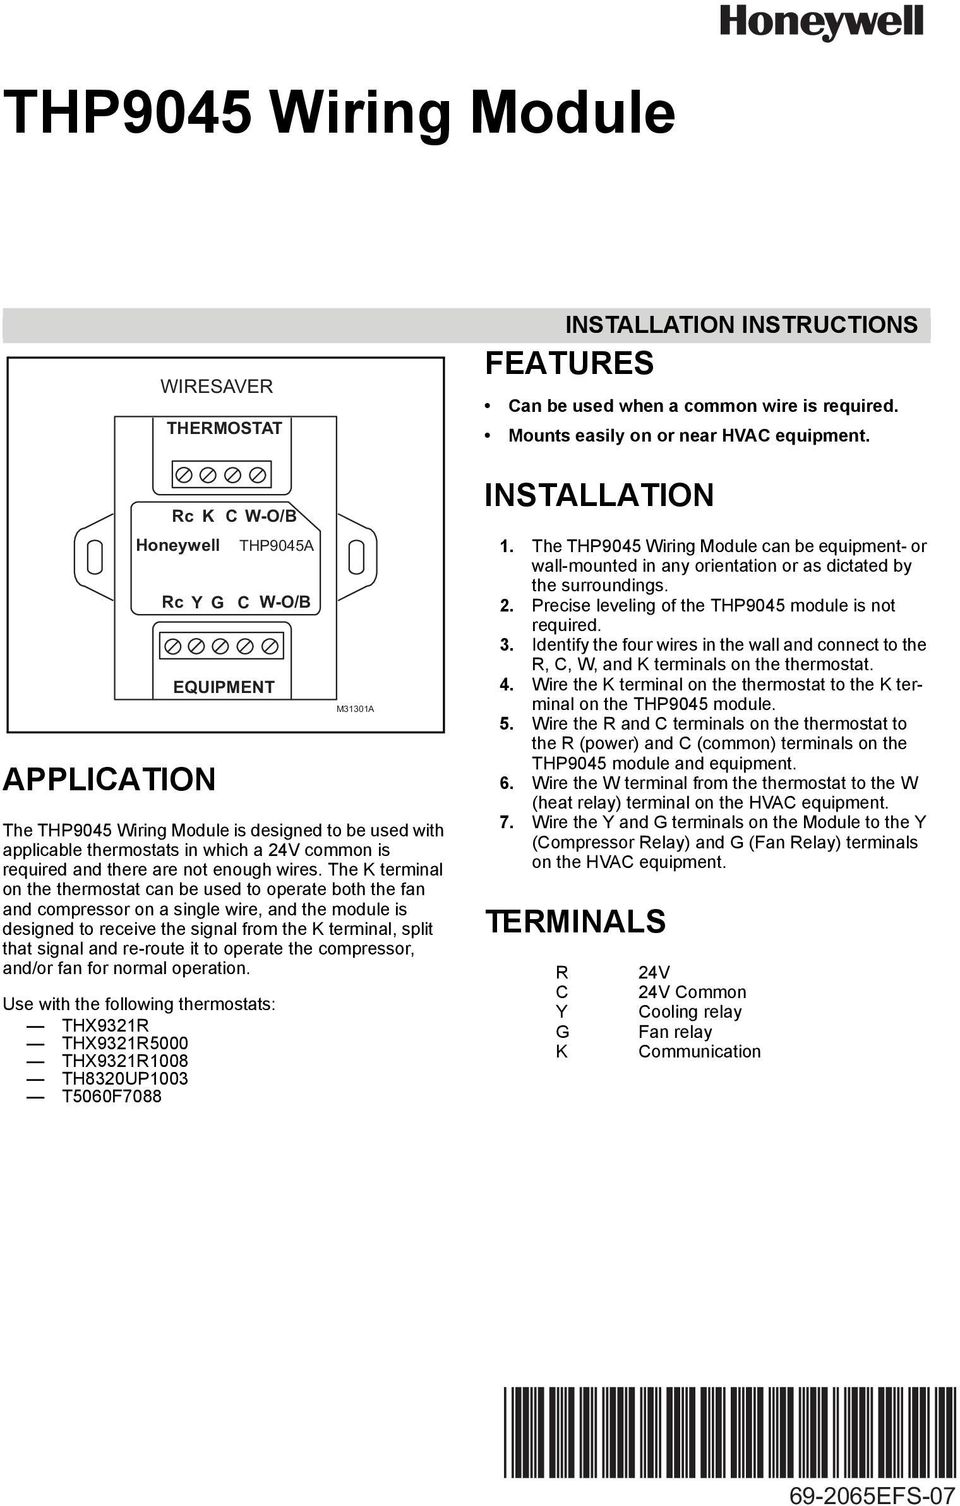 The terminal on the thermostat can be used to operate both the fan and compressor on a single wire, and the module is designed to receive the signal from the terminal, split that signal and re-route